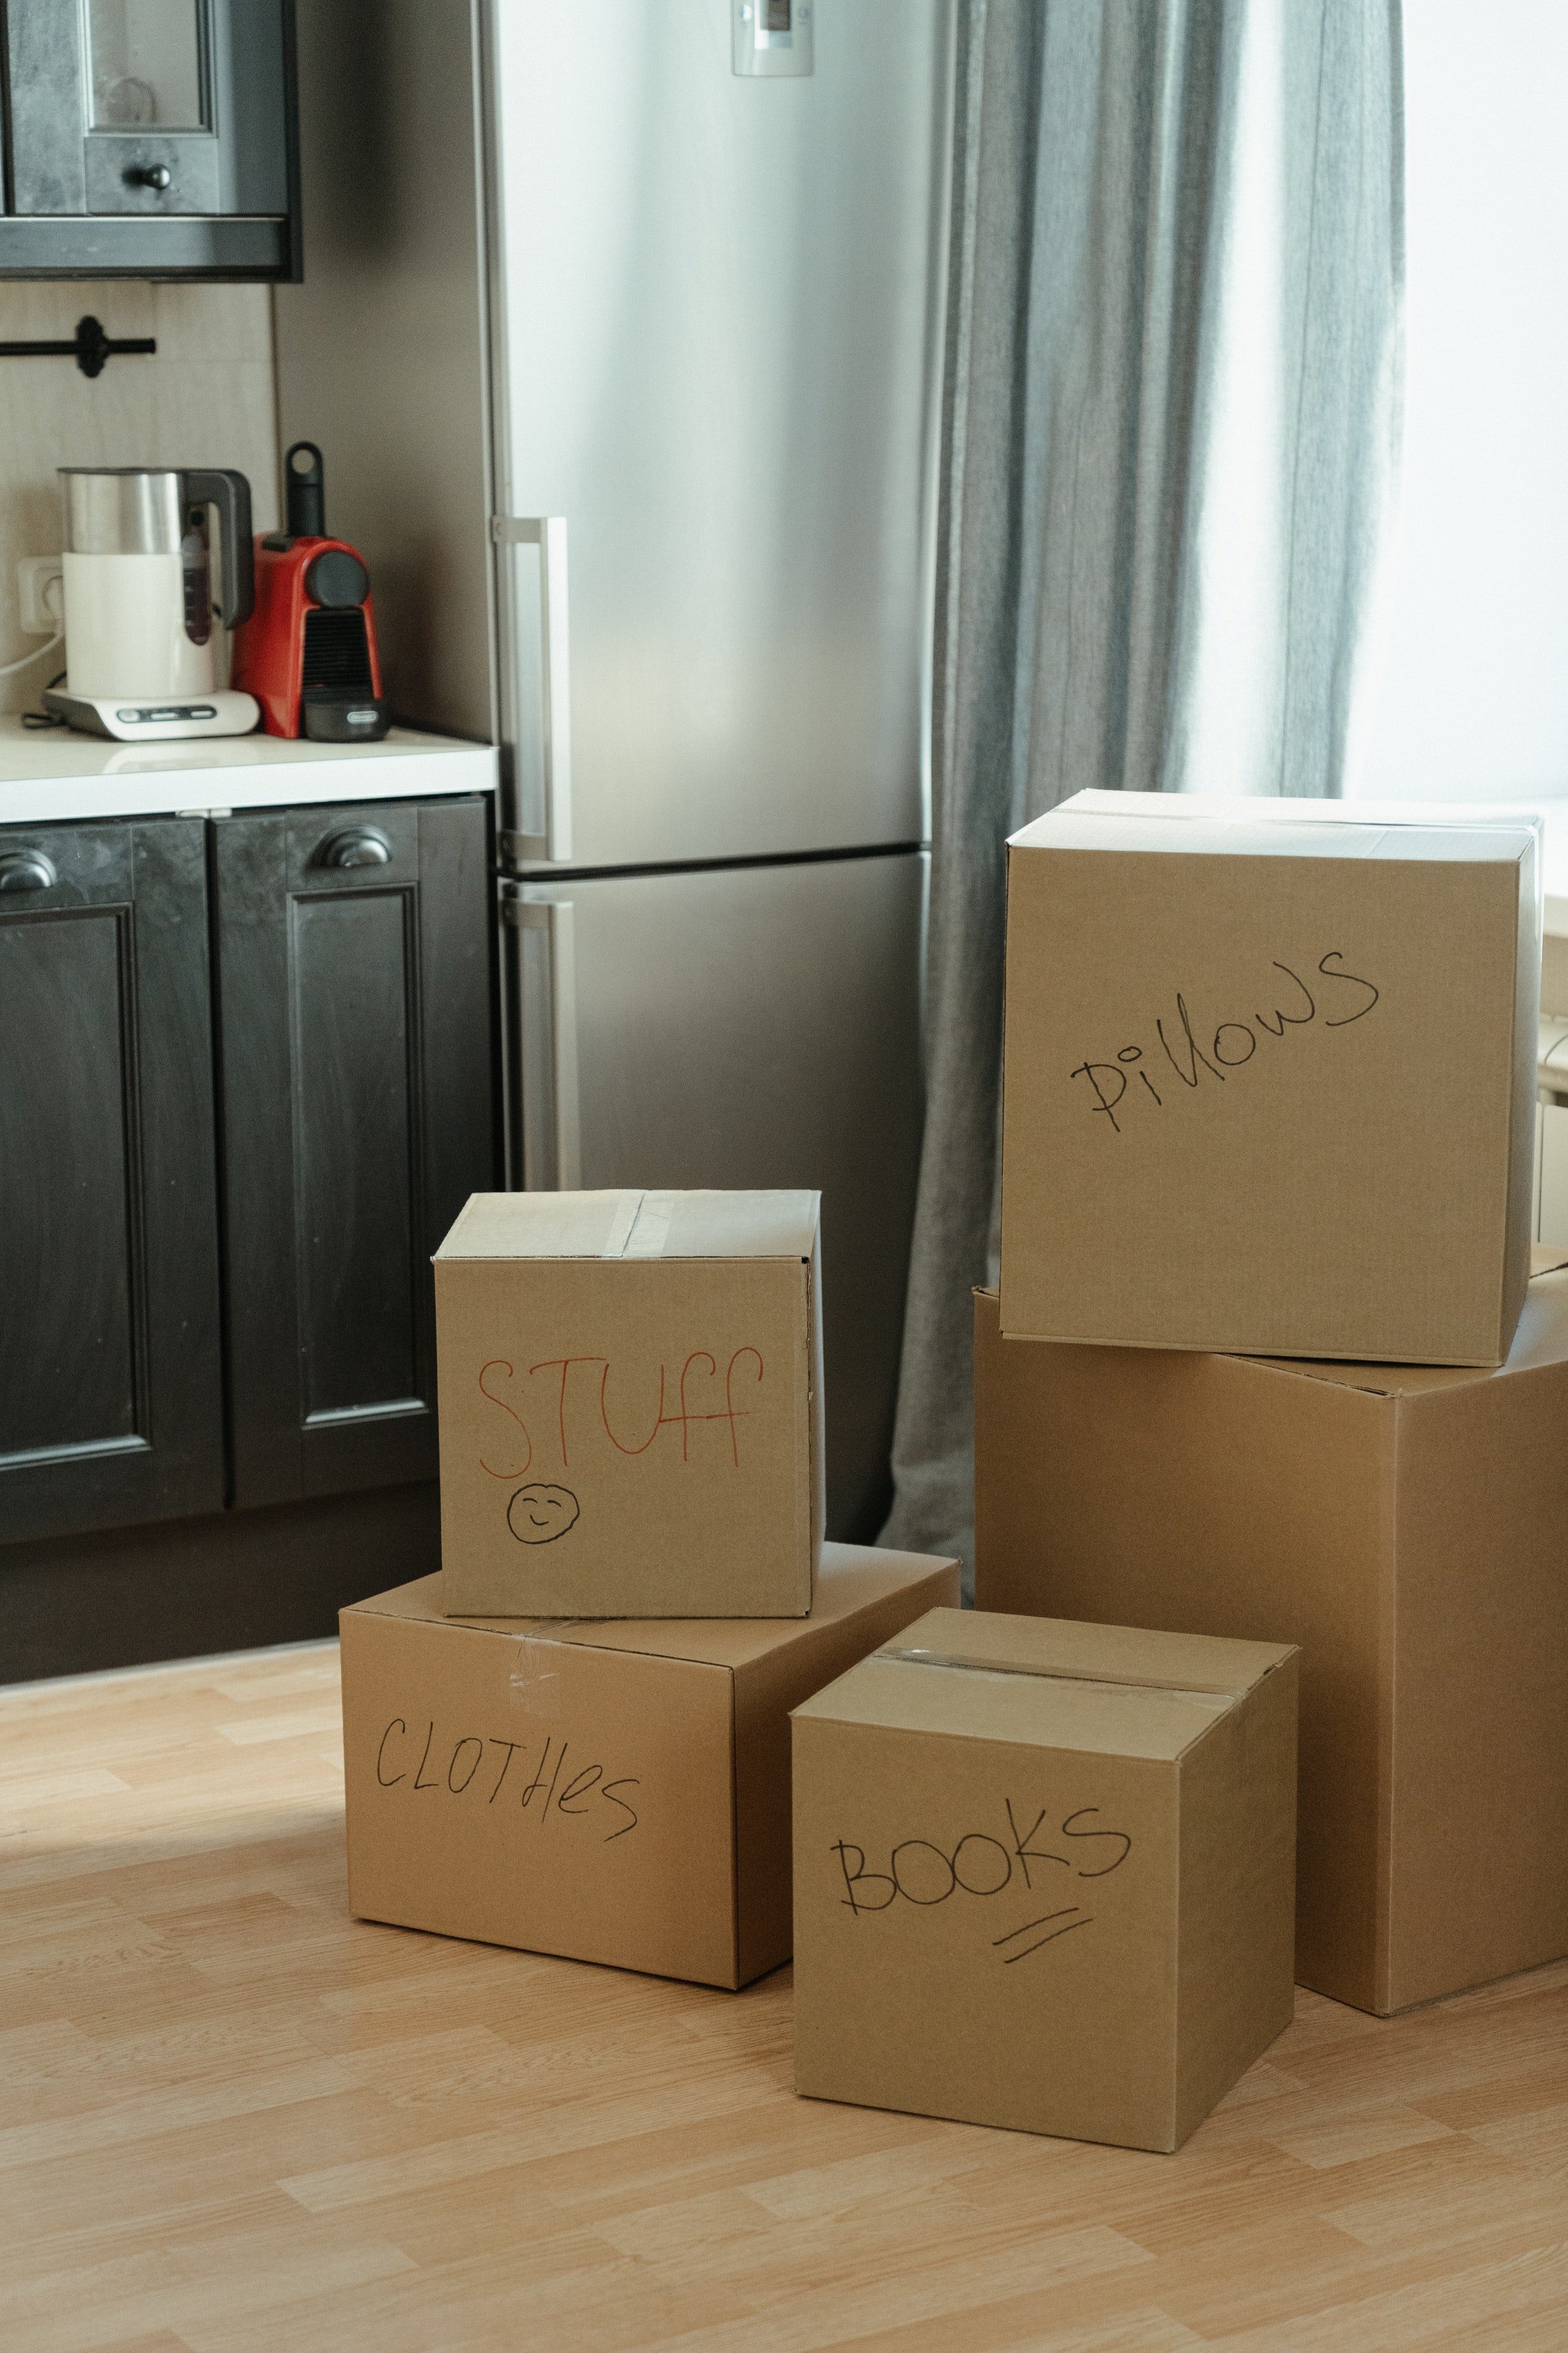 Boxes of donations were given to Deborah and her mom. | Source: Pexels